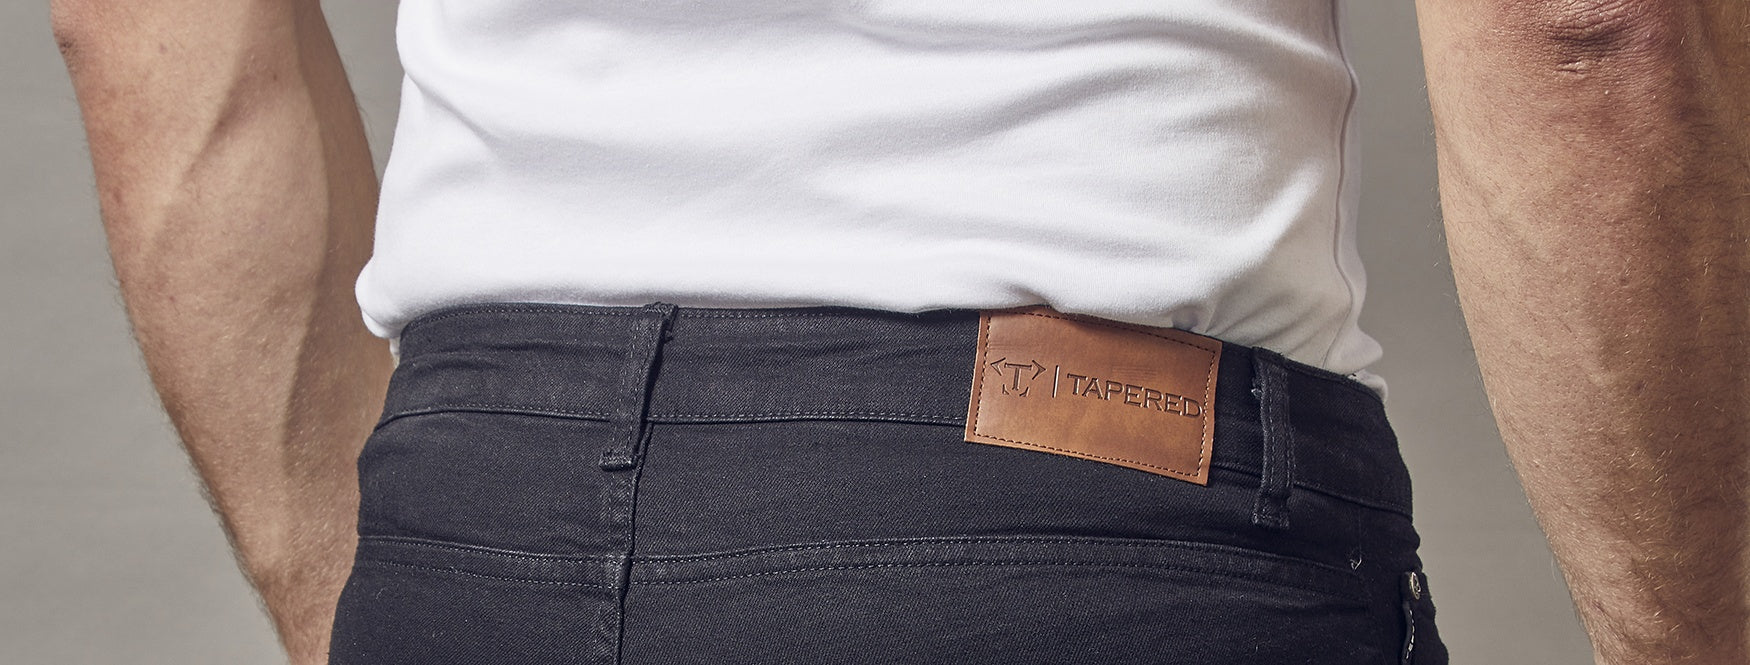 Low Rise Vs High Rise Jeans  - Tapered Menswear